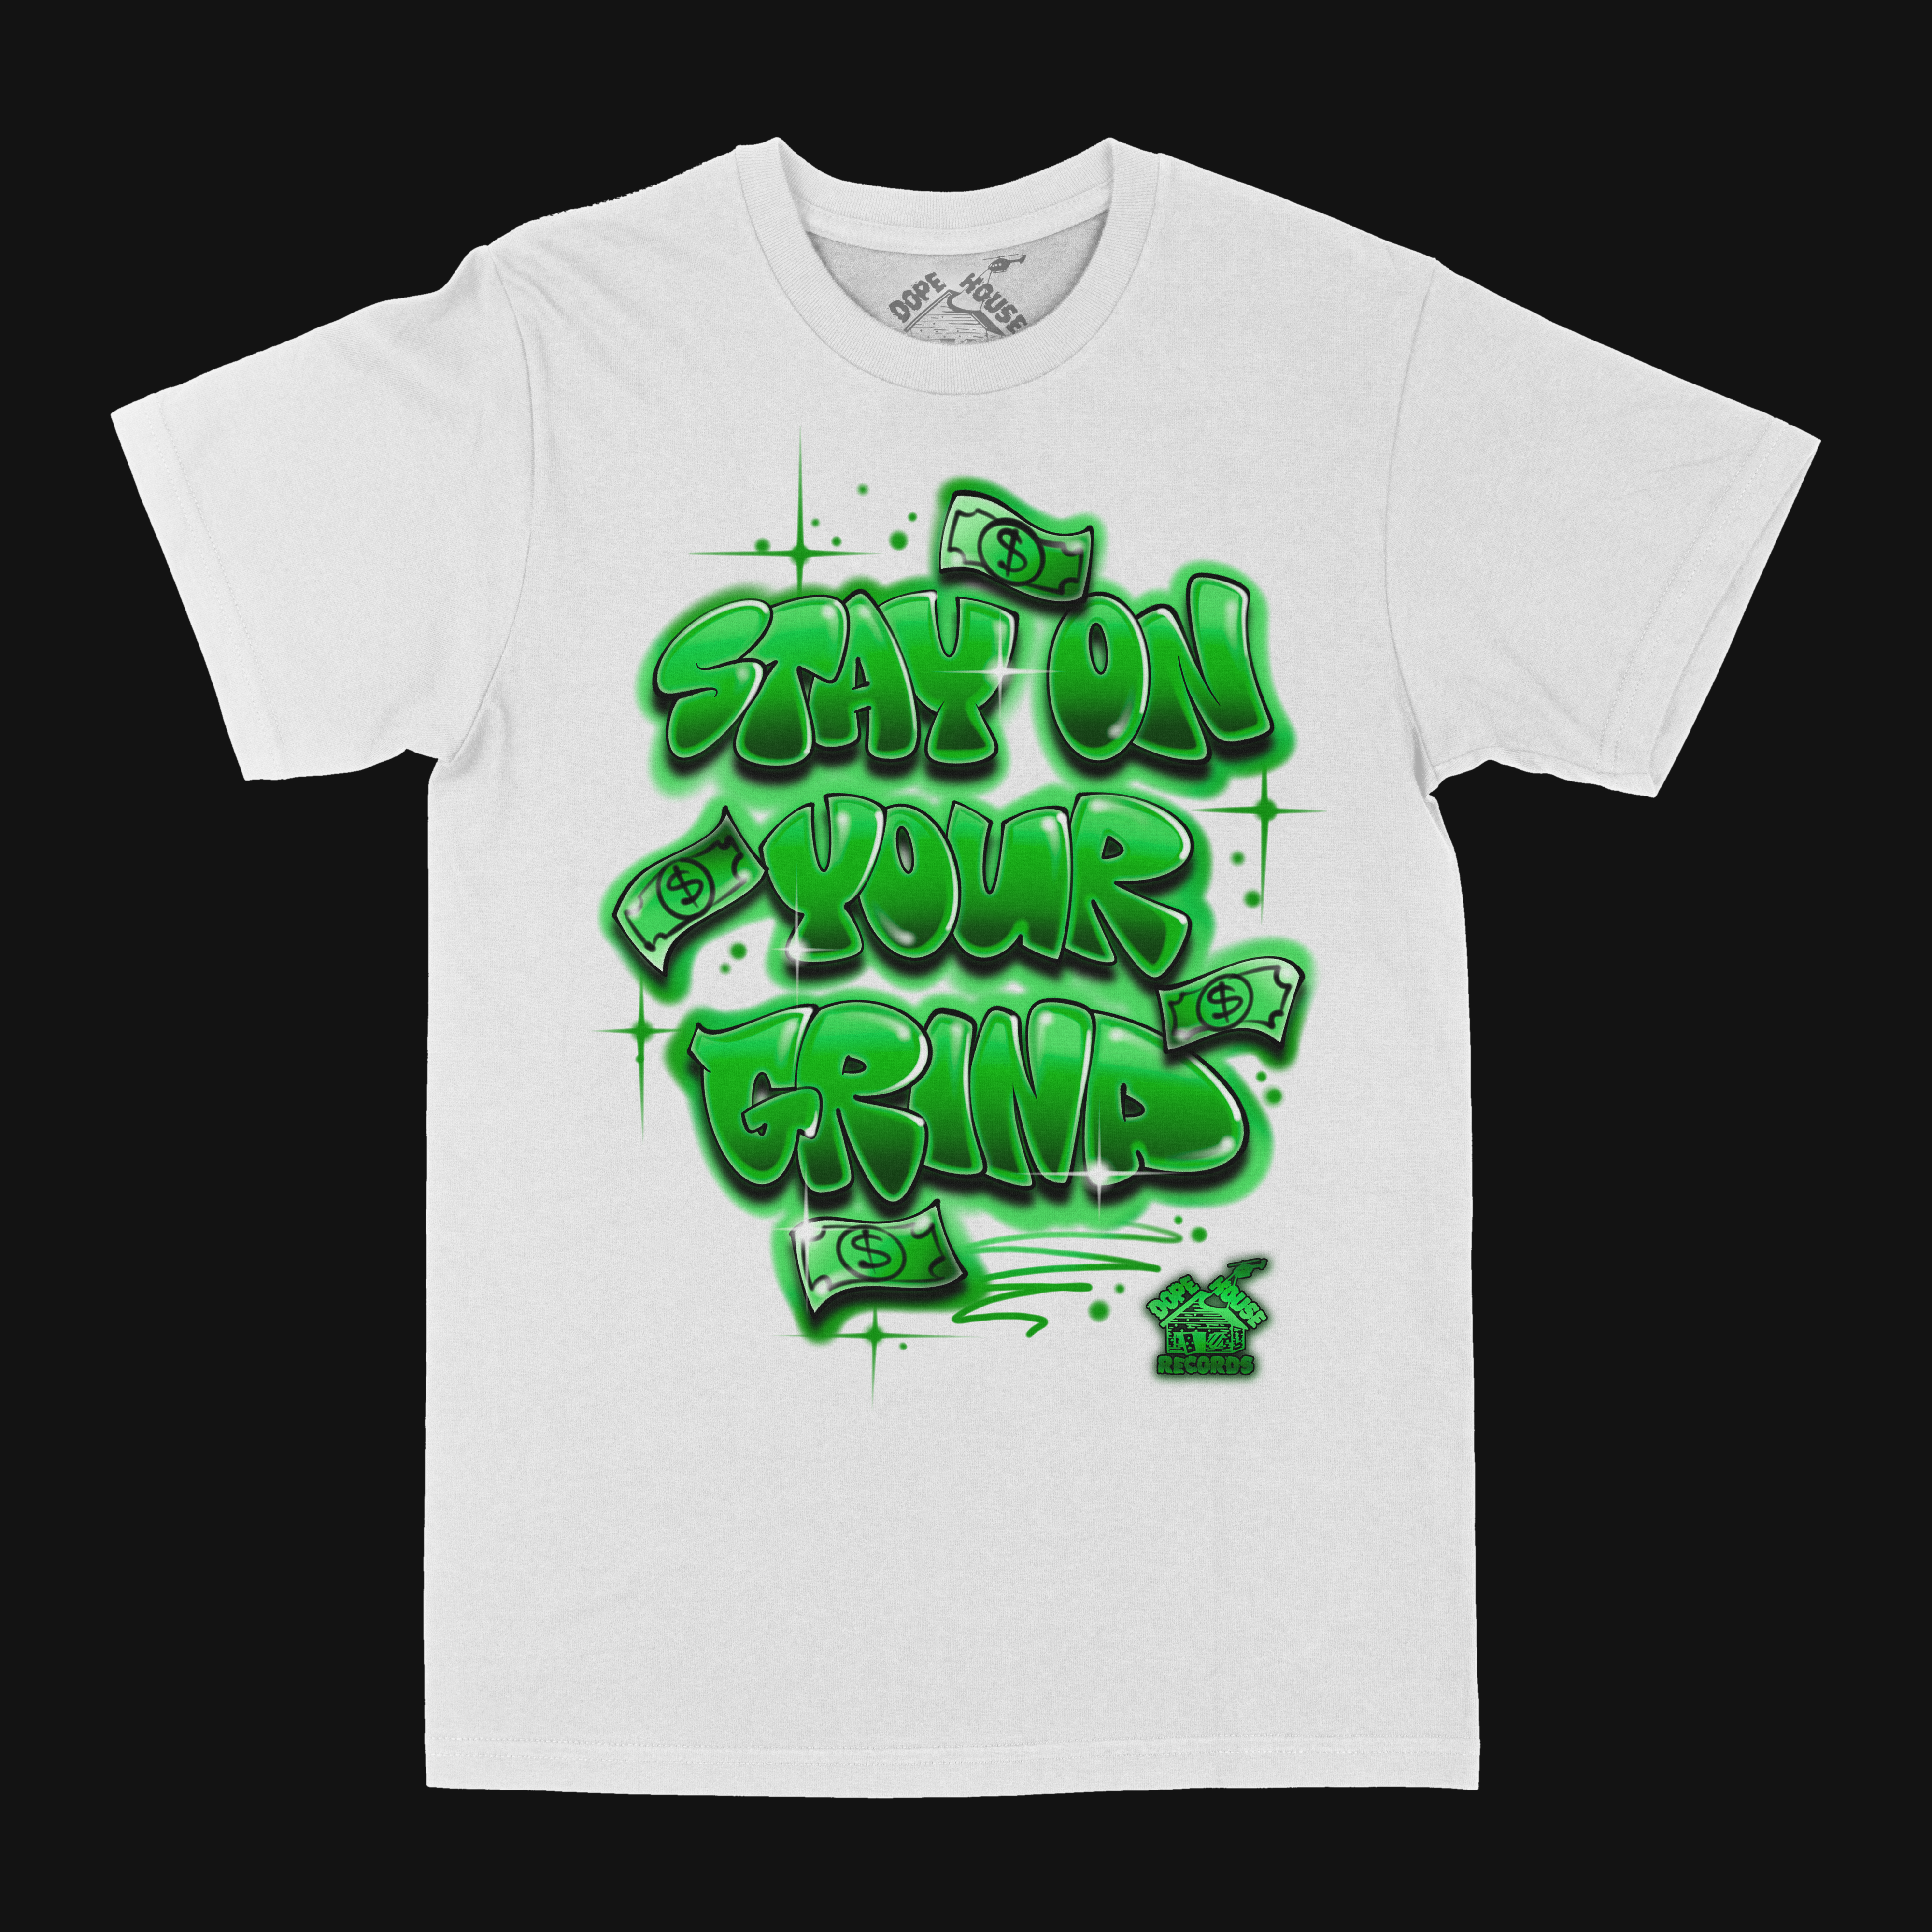 Stay On Your Grind Tee - Dope House Records